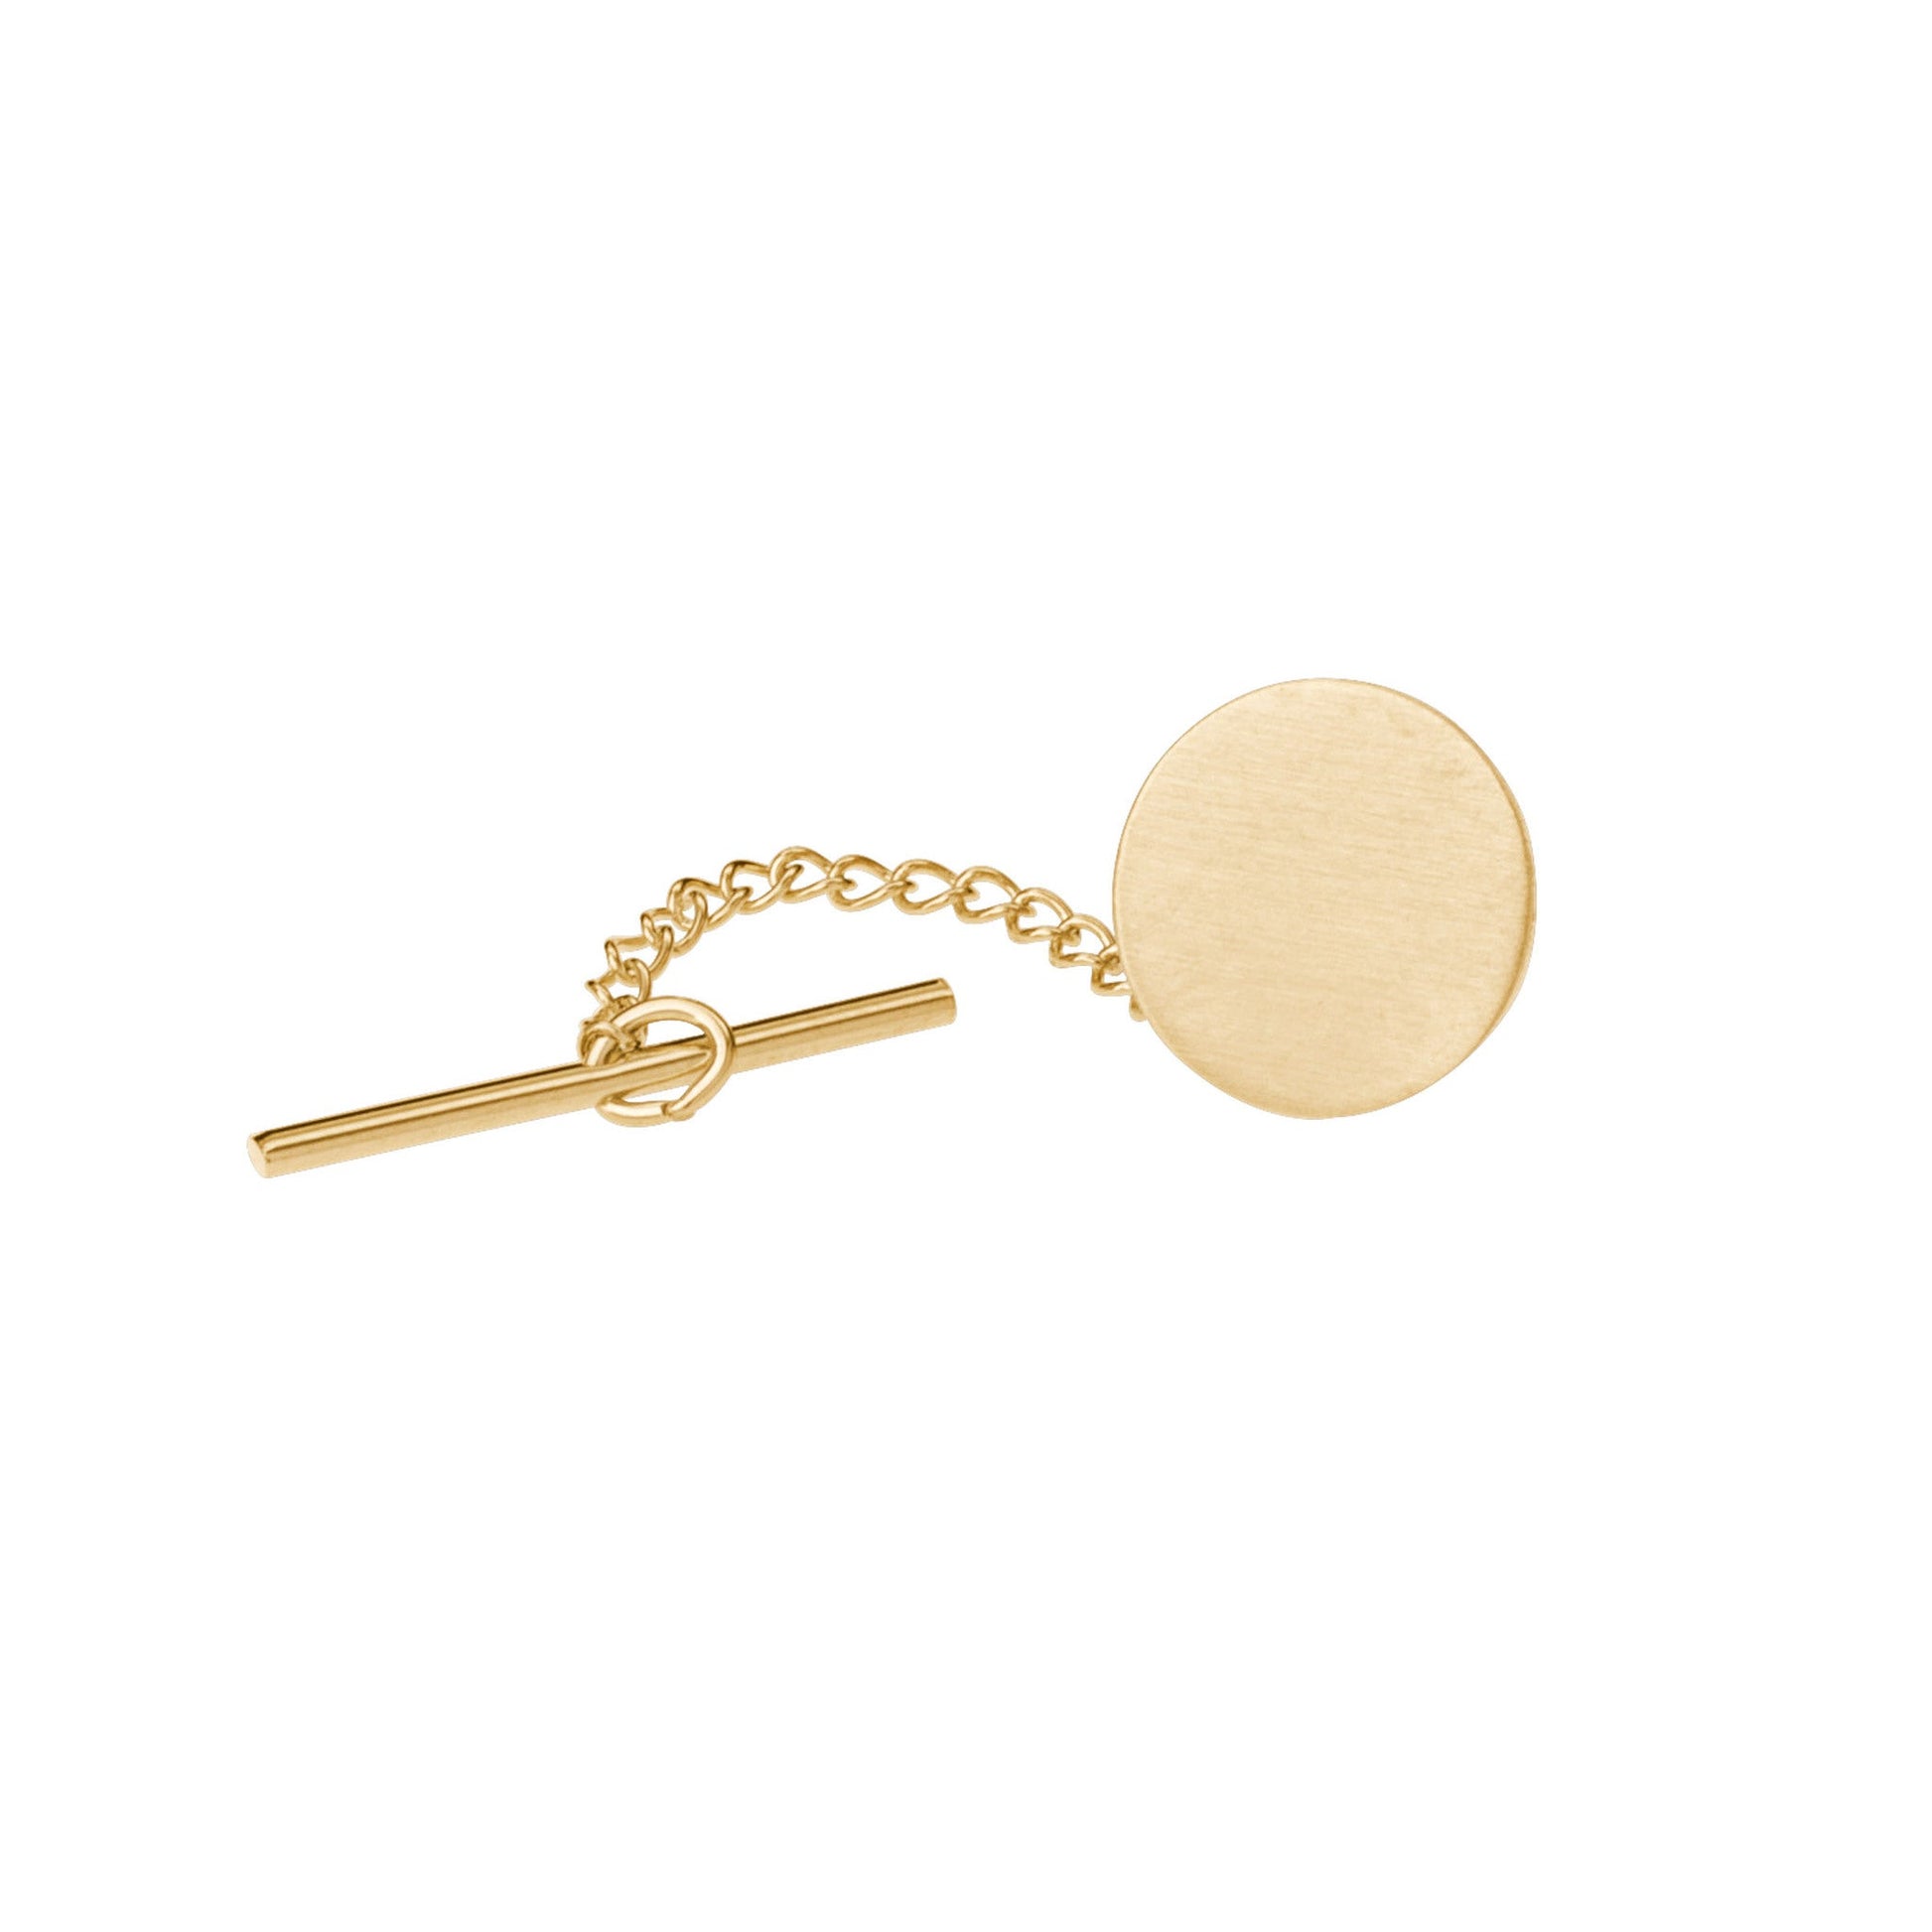 A round polished tie tack displayed on a neutral white background.